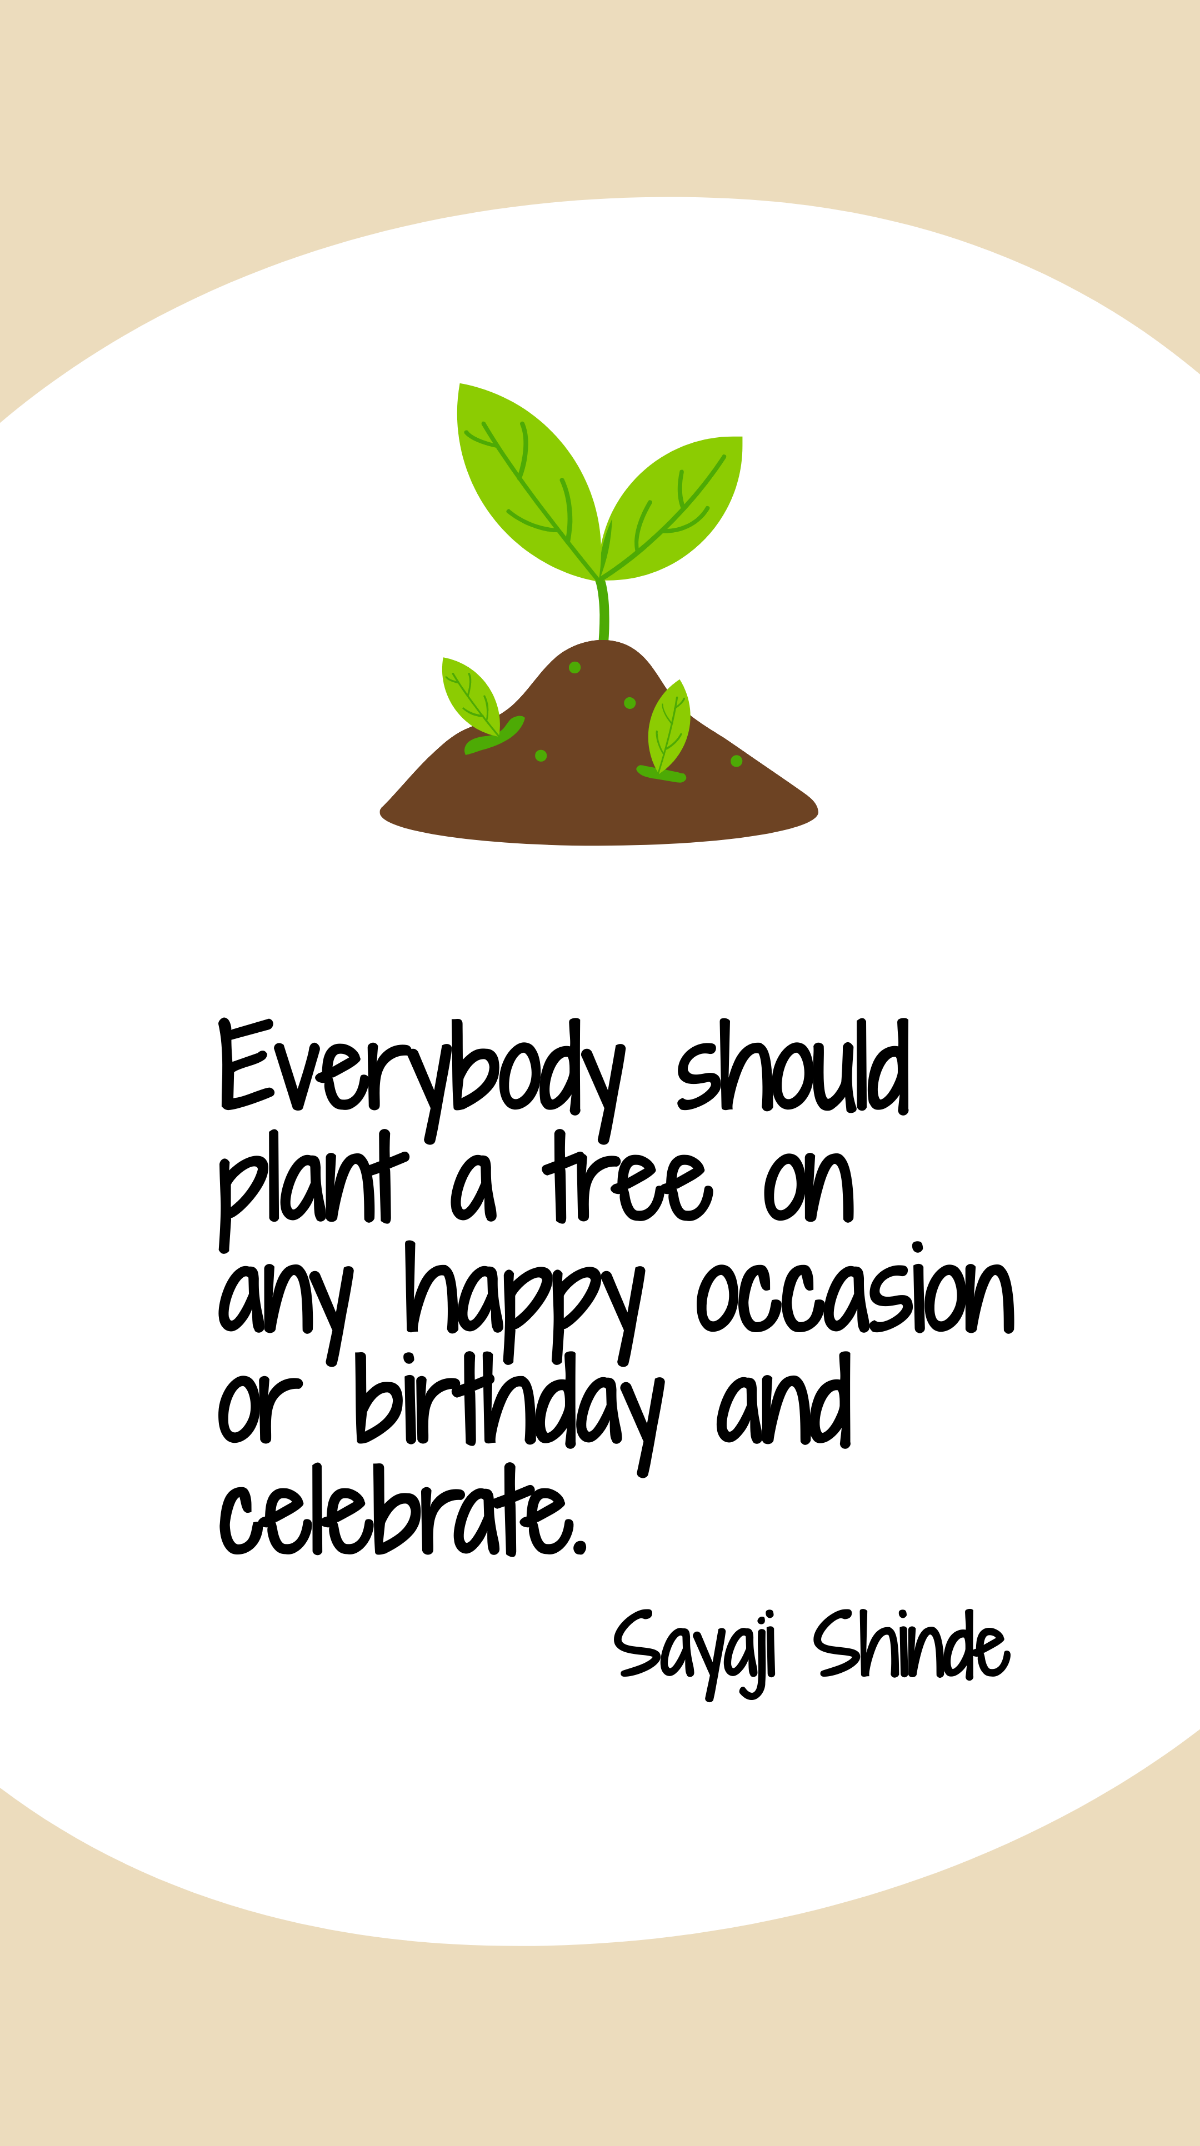 Sayaji Shinde - Everybody should plant a tree on any happy occasion or birthday and celebrate.